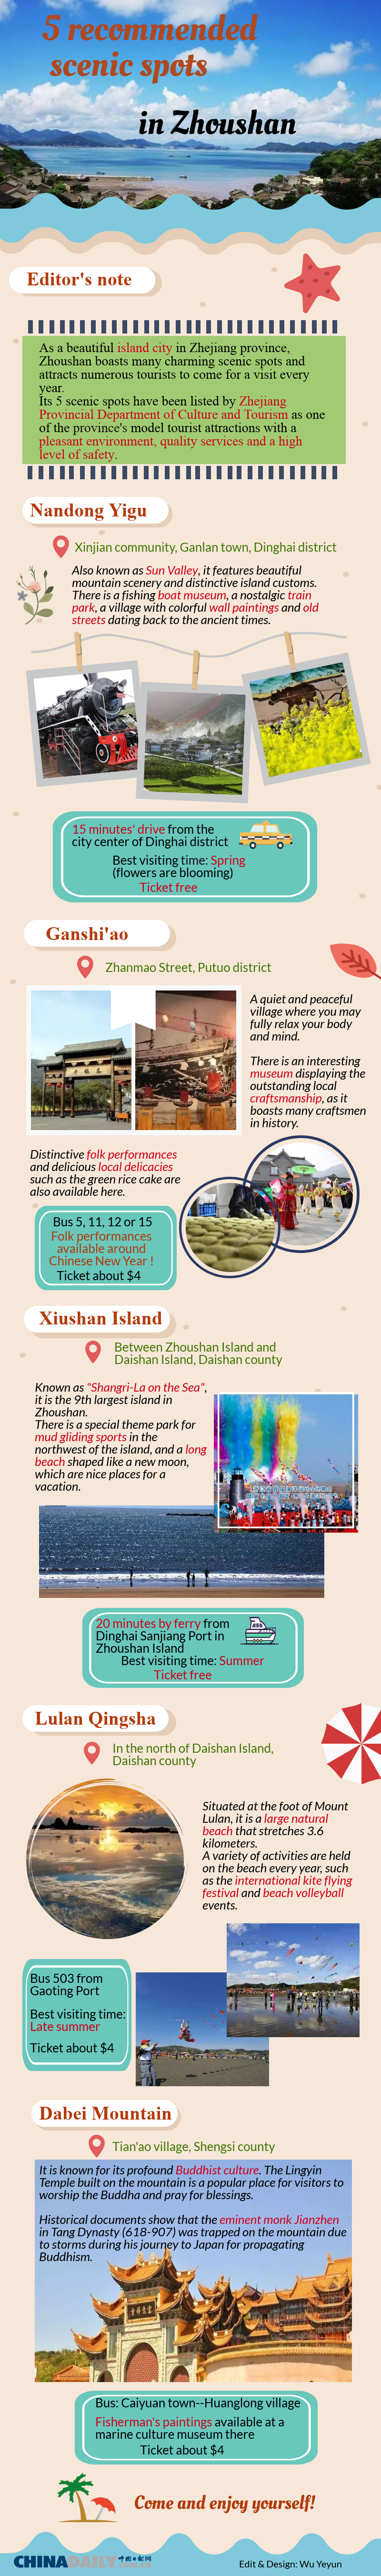 5 recommended scenic spots in Zhoushan.png